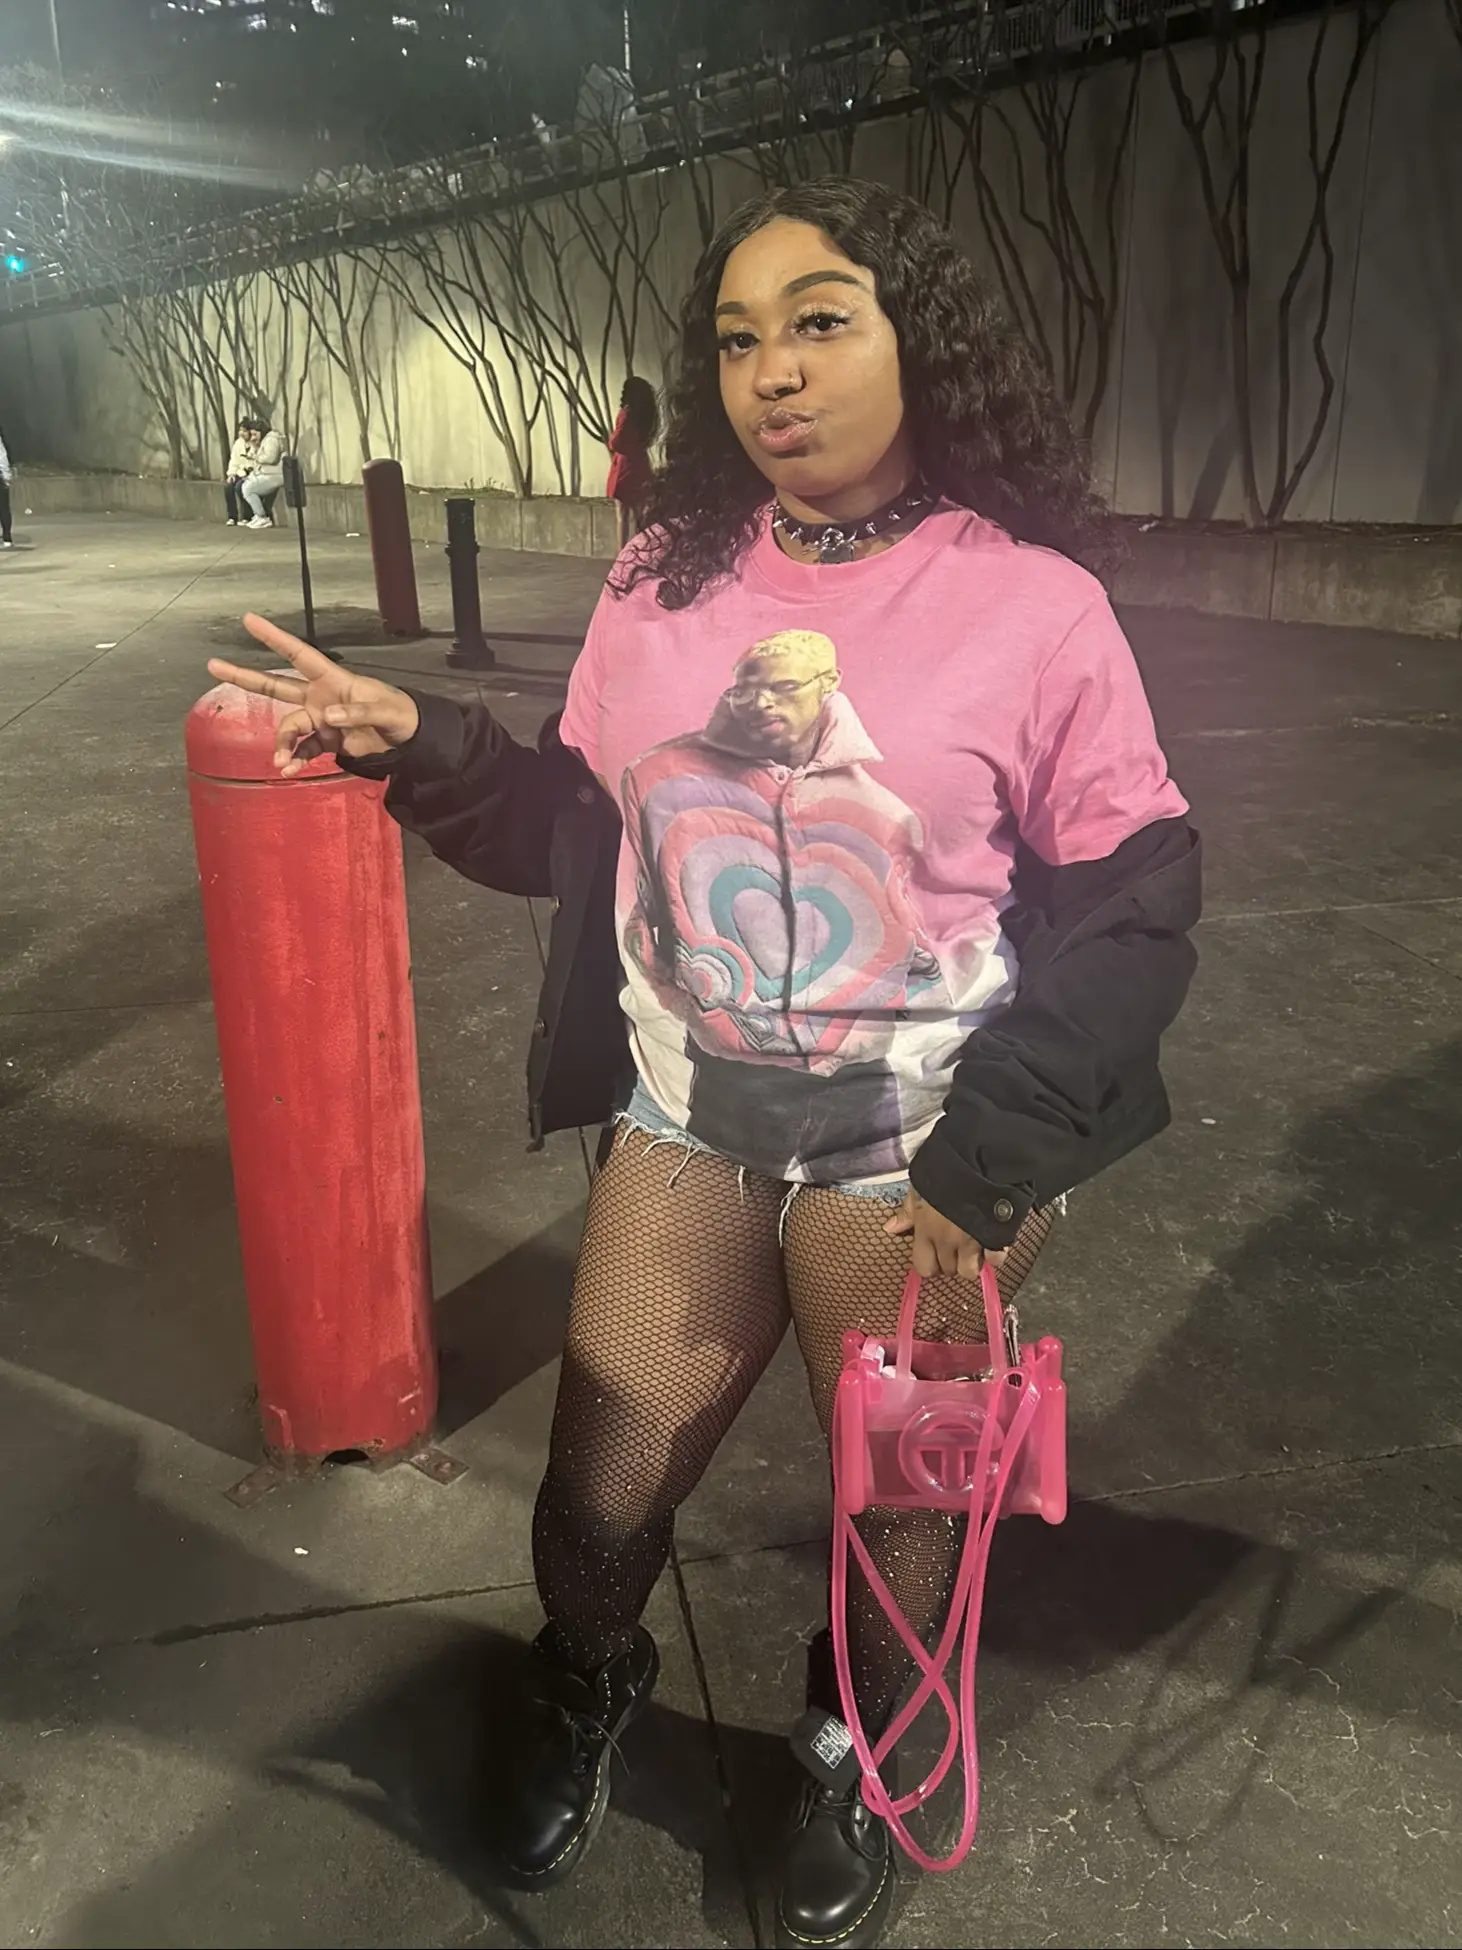 DRAKE CONCERT OUTFIT, Gallery posted by Karina Aker